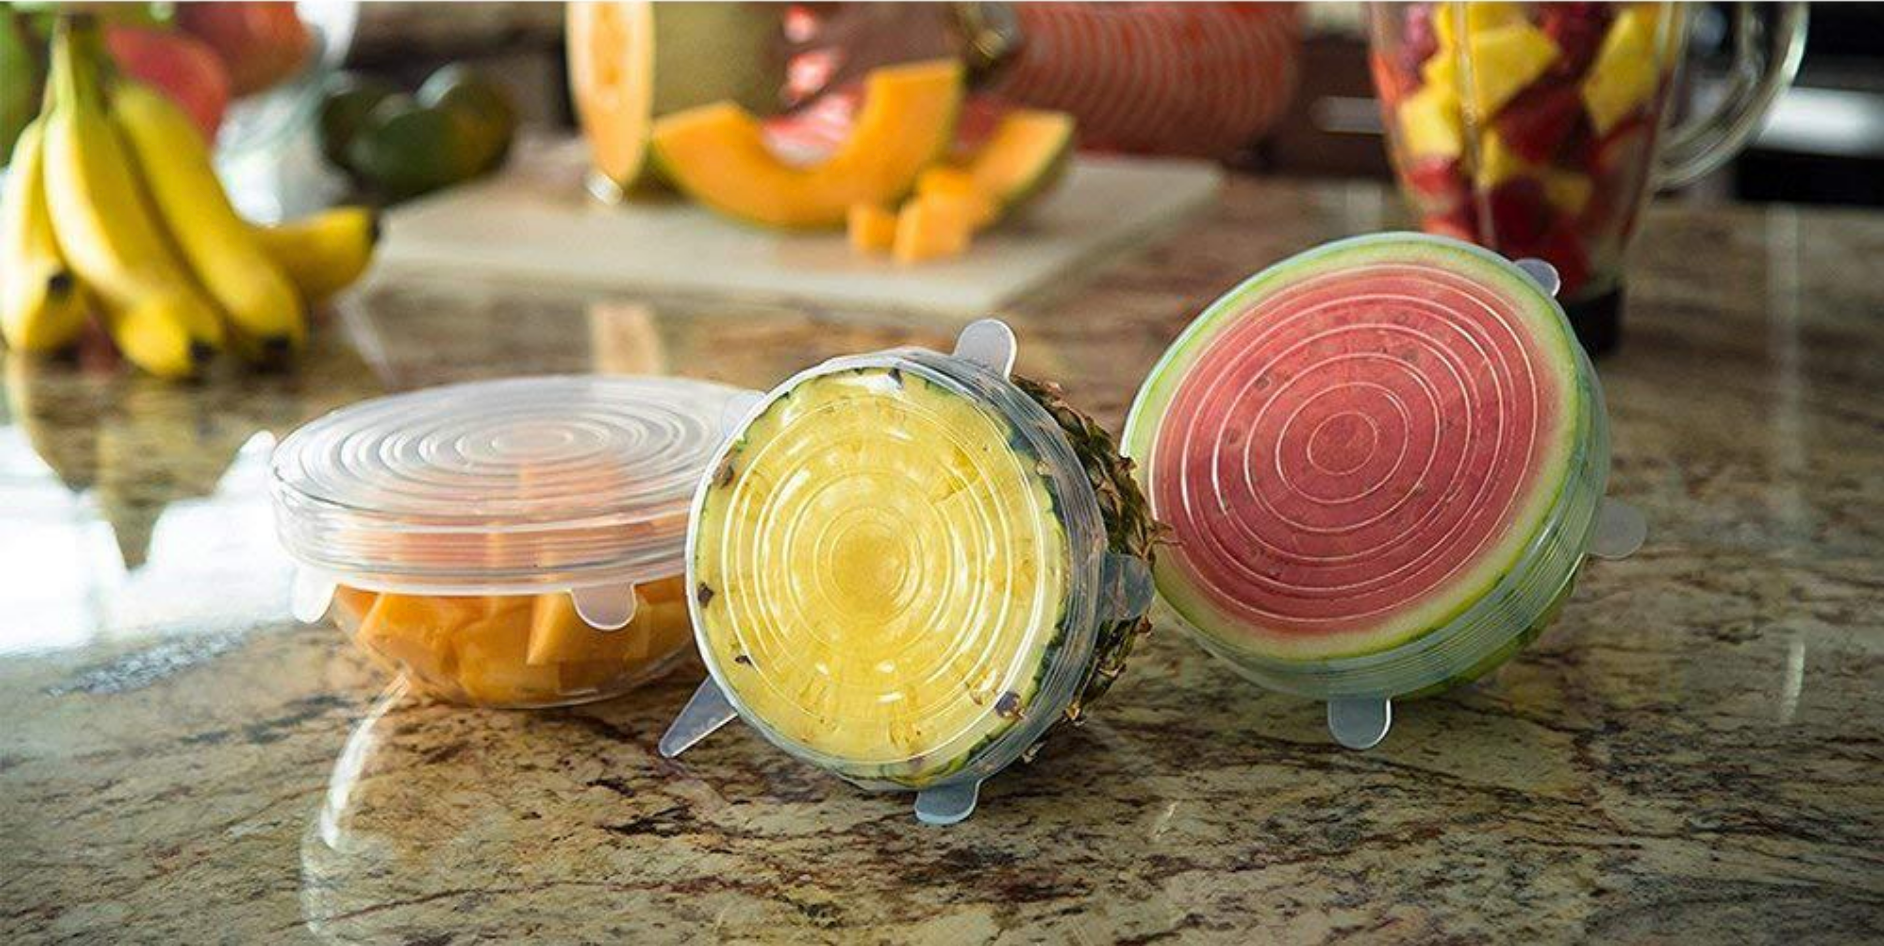 Kitchen gadgets review: silicone bagel moulds – holy snack heaven